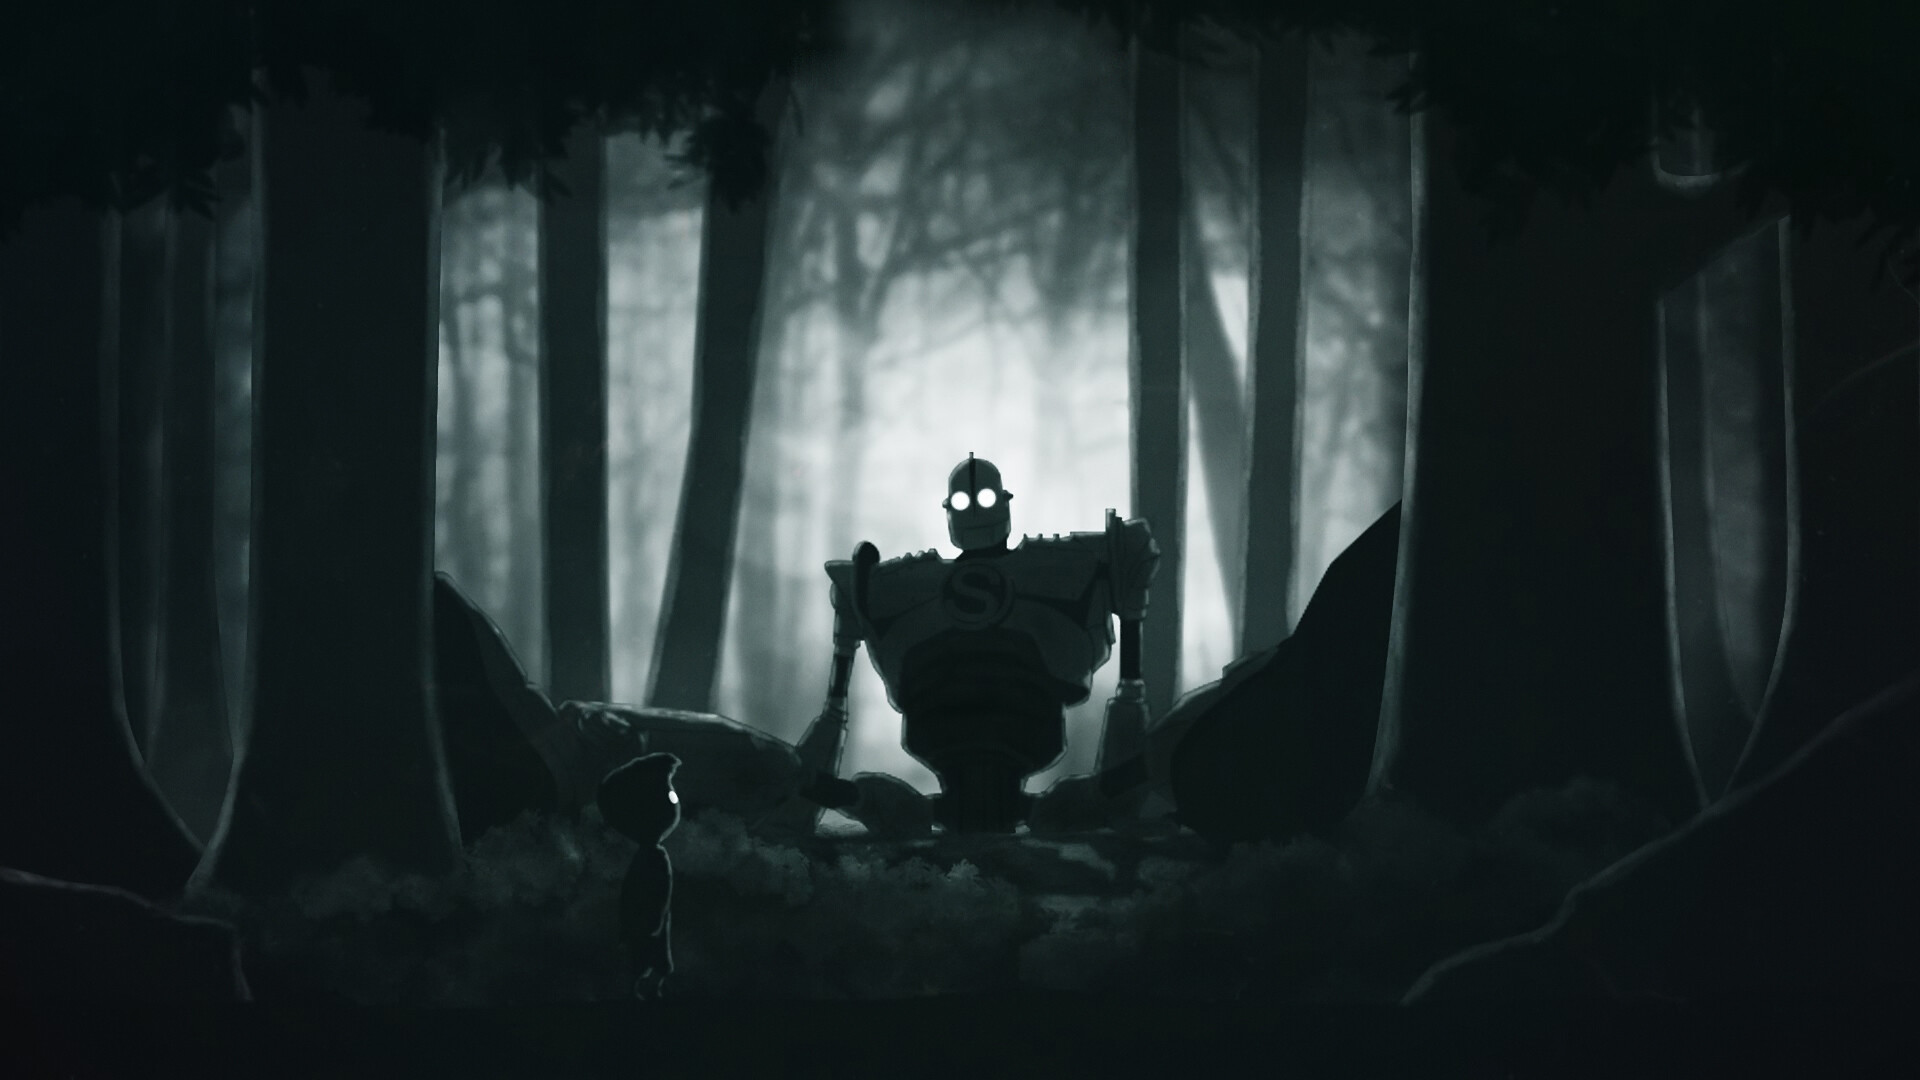 Limbo: The game was selected as the 2010 Annie Award for Best Animated Video Game. 1920x1080 Full HD Background.